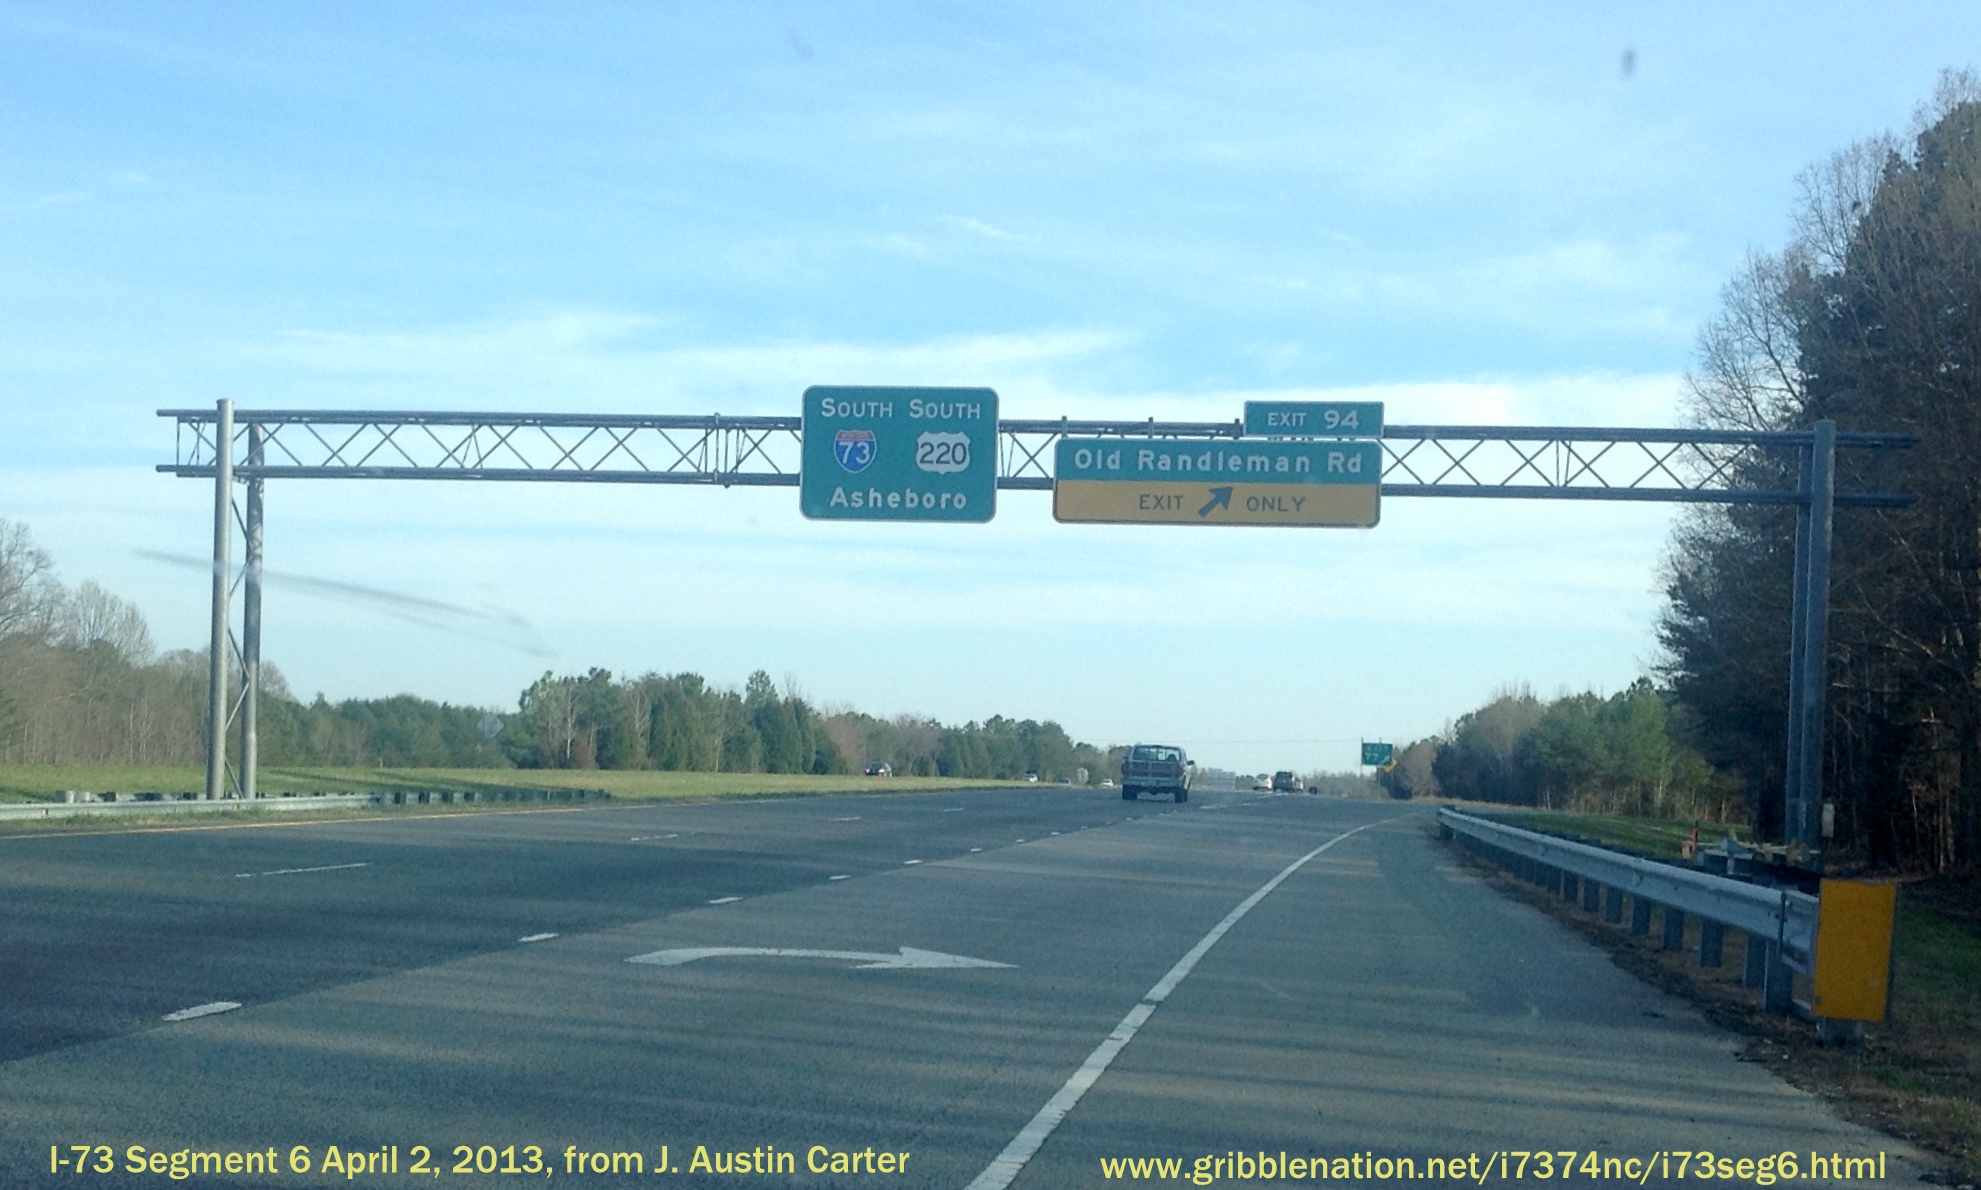 Photo of new I-73 shield added to pull through signage overhead for now Exit 
96 for Old Randleman Rd in April 2013, Courtesy of J. Austin Carter